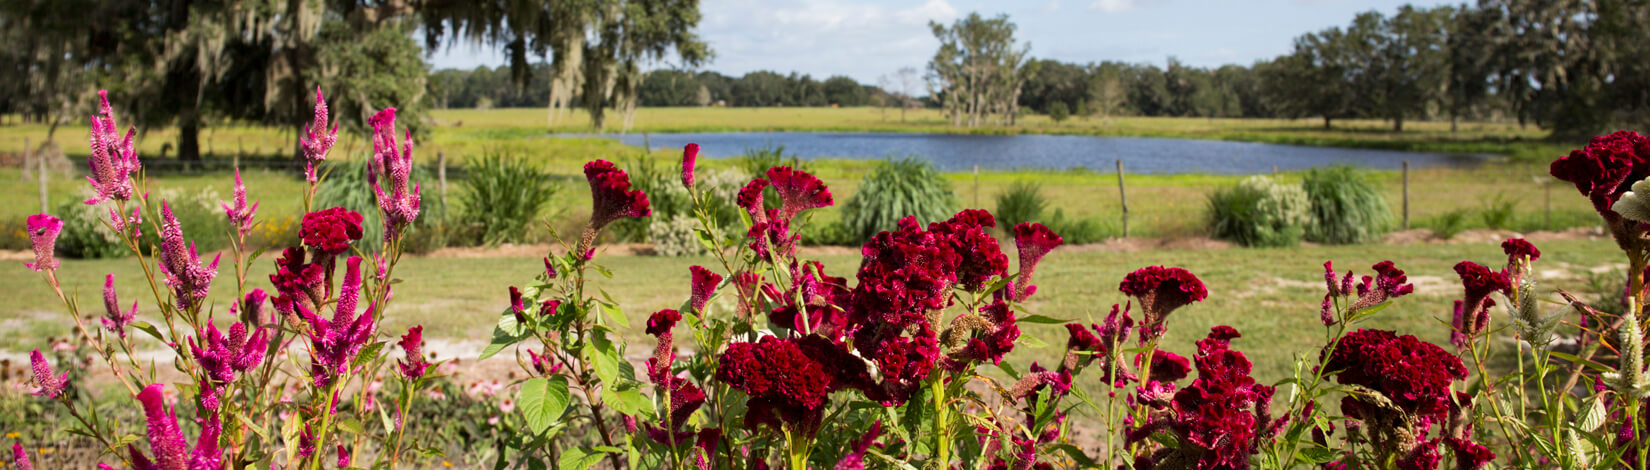 red flowers in foreground with background view of lake and trees